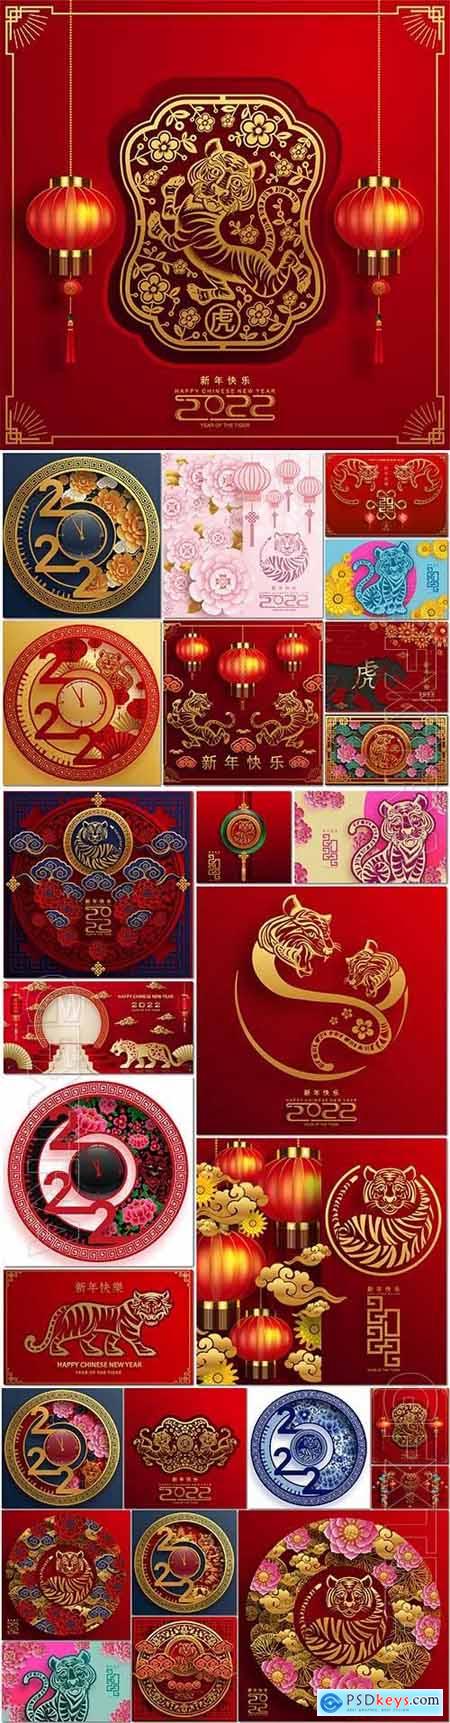 Chinese new year 2022 year of the tiger vector illustration